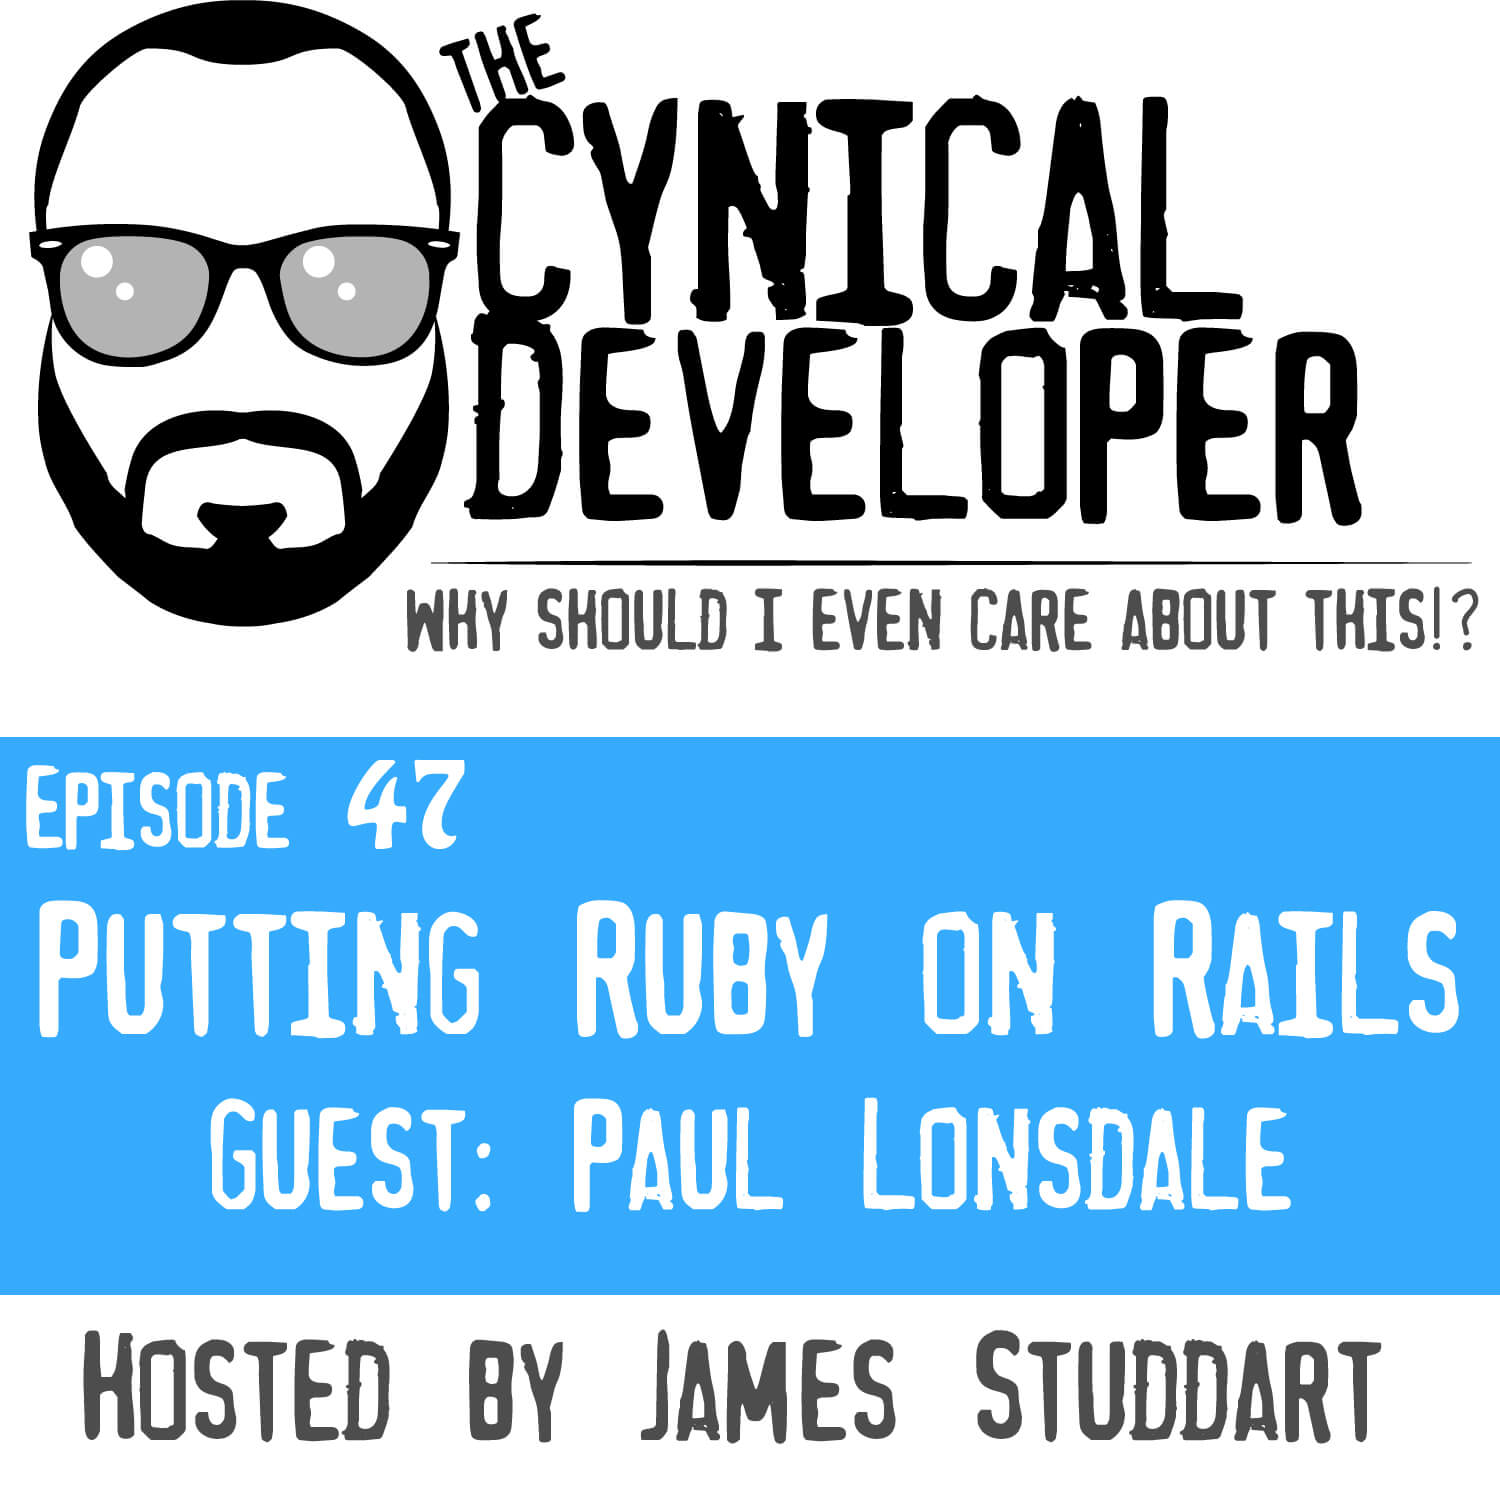 Episode 47 - Putting Ruby on Rails